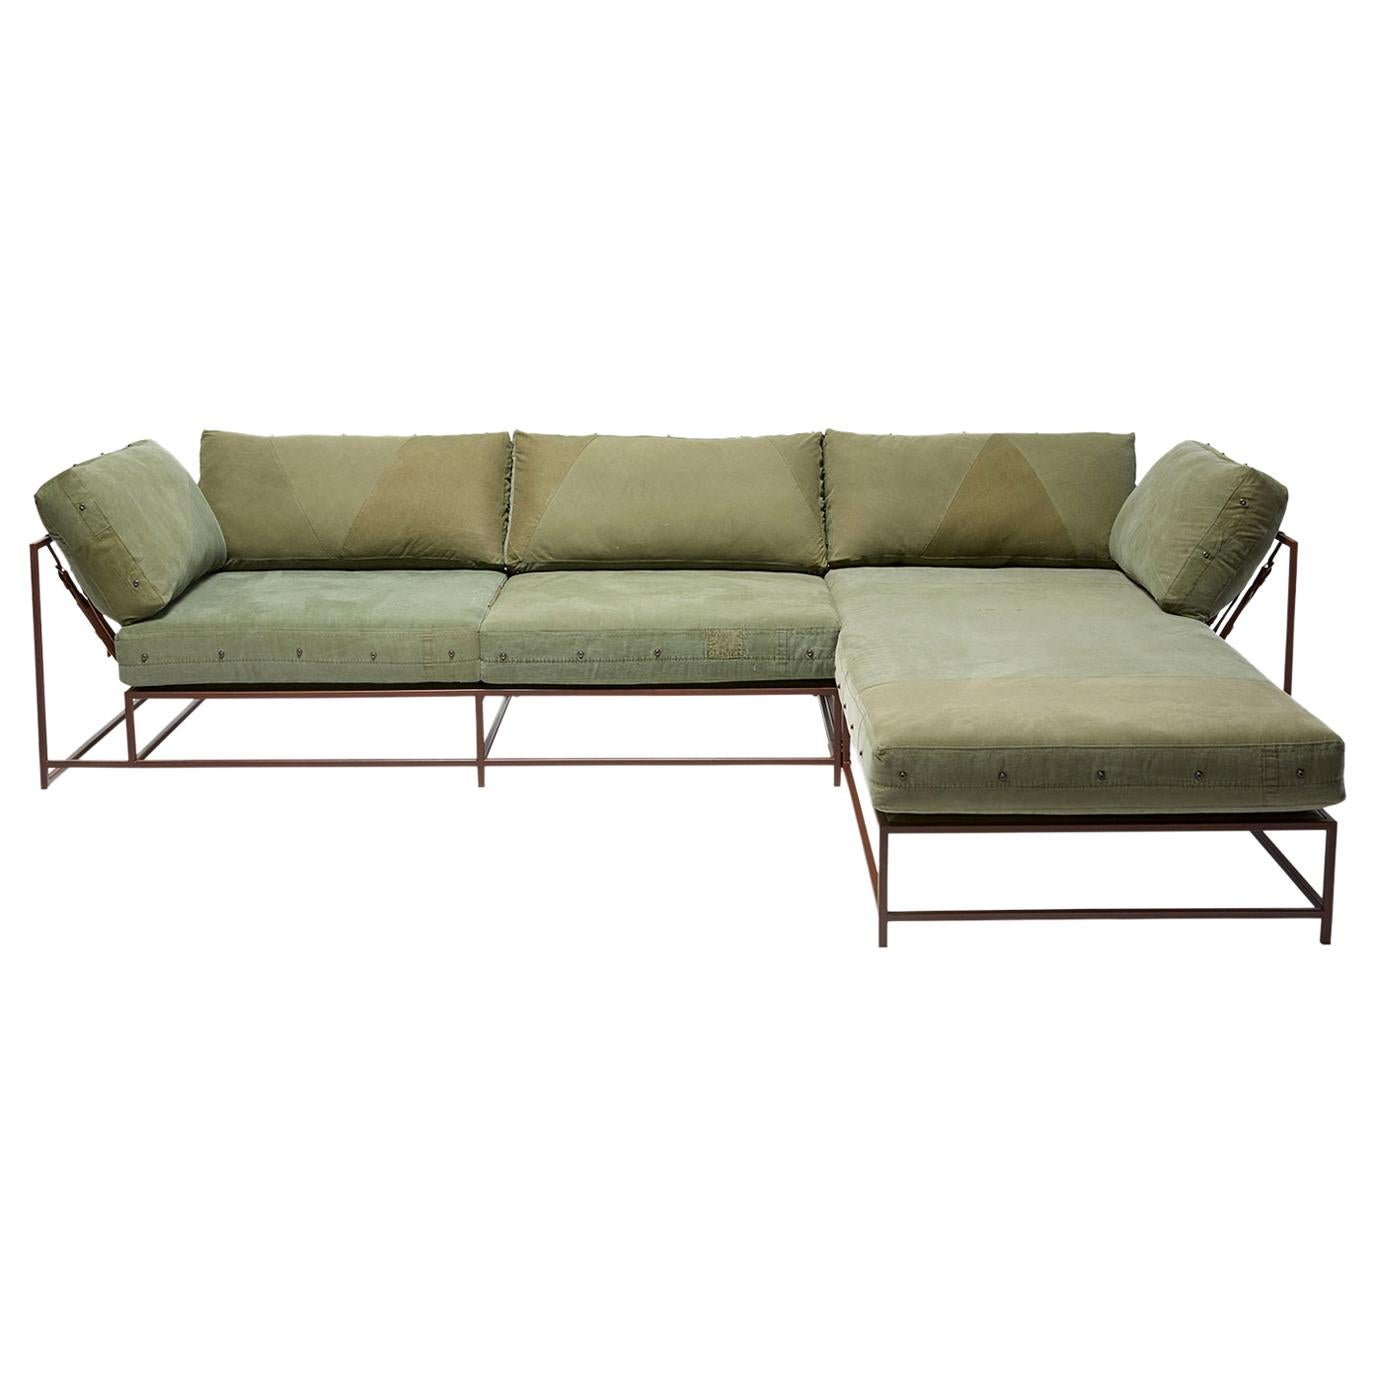 Vintage Military Canvas & Marbled Rust Lounge Sectional For Sale